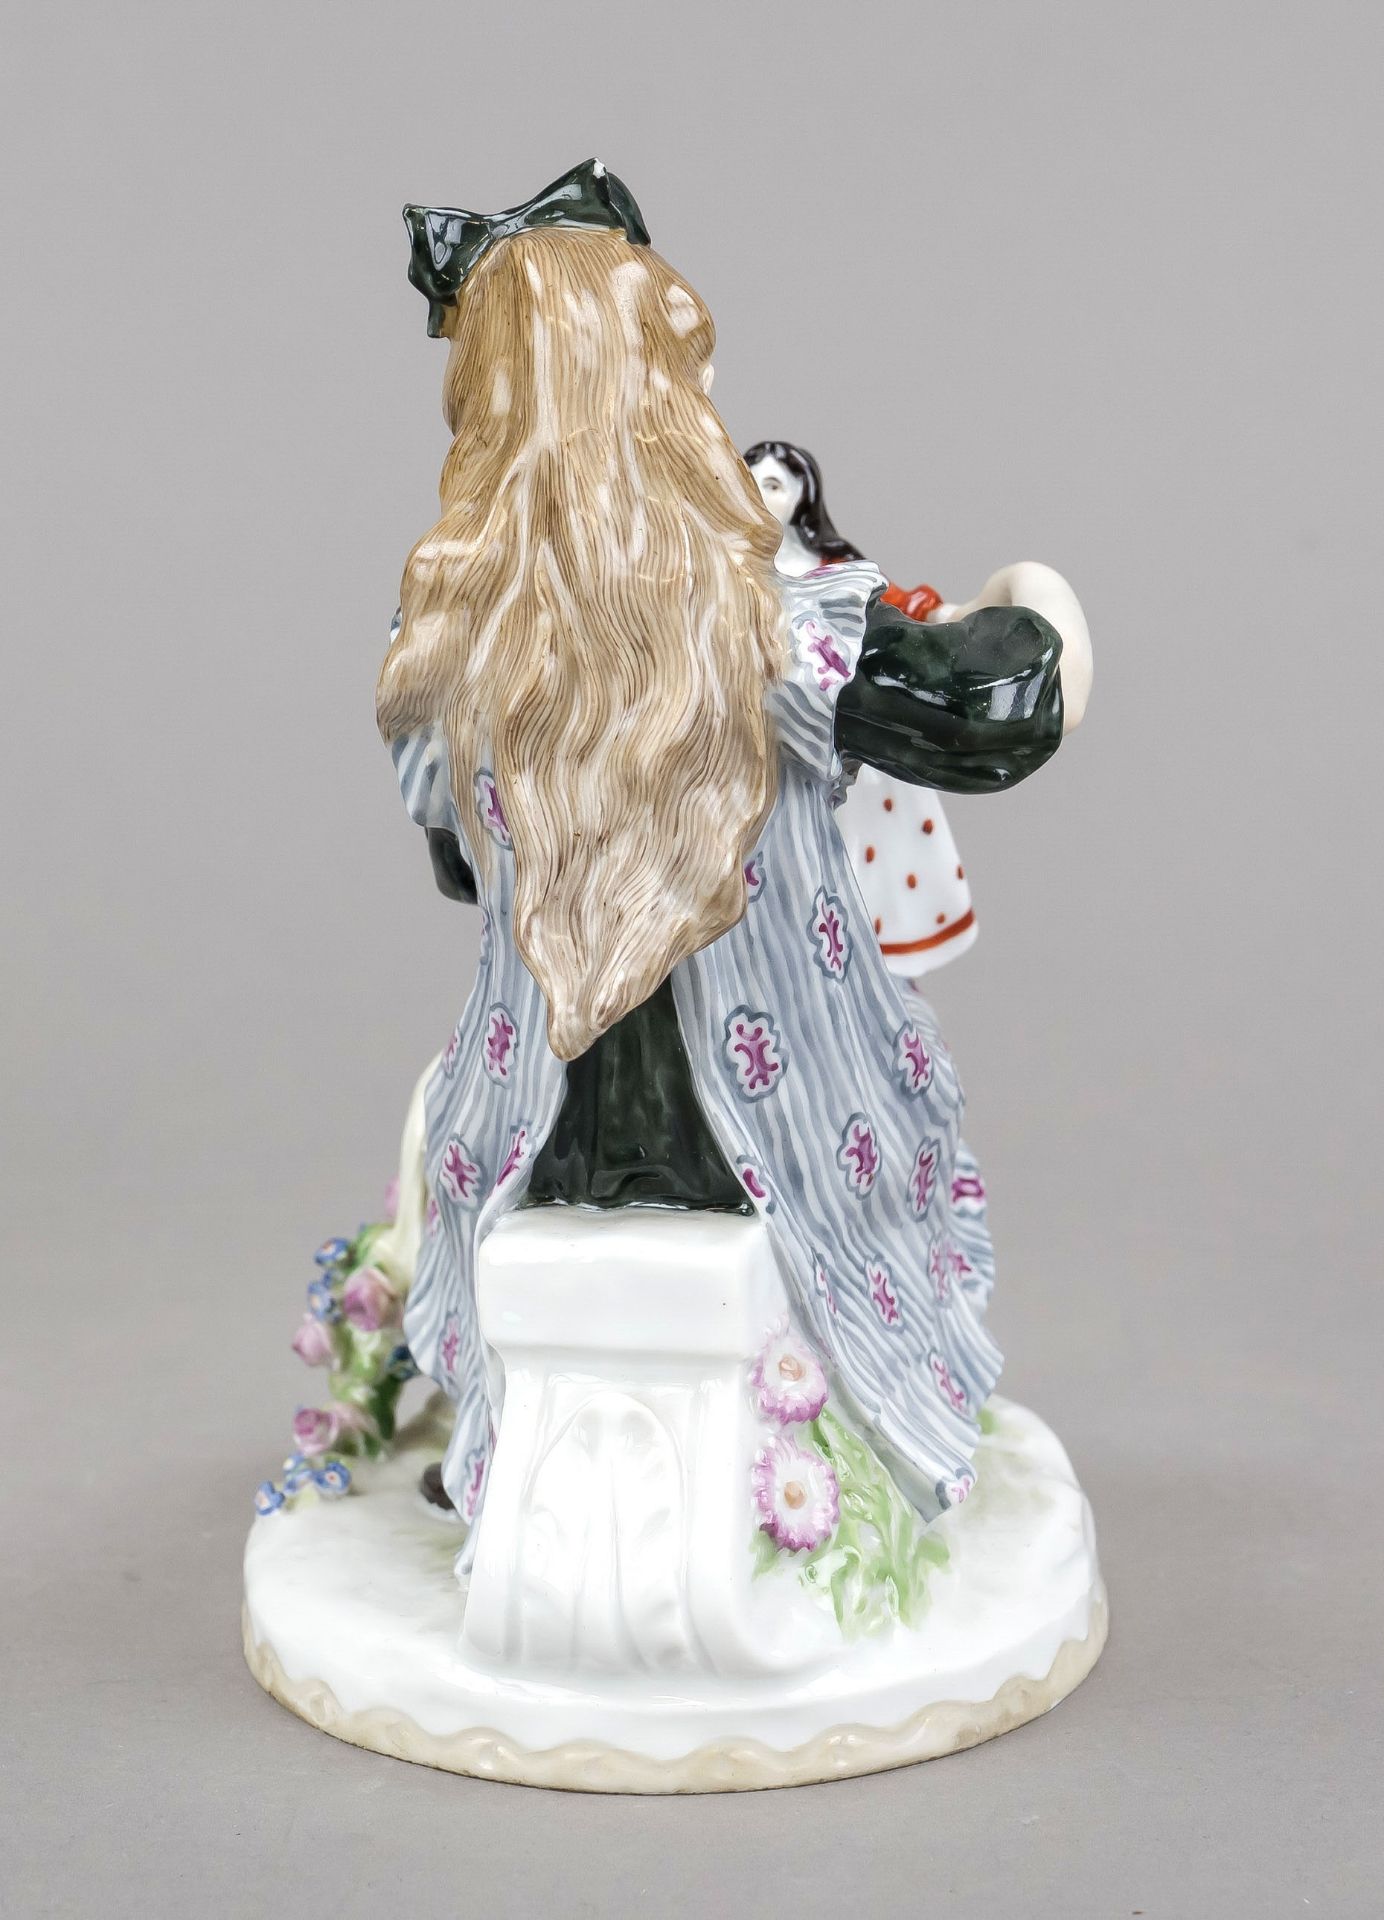 Girl with doll, Meissen, Knauff Schwerter mark 1850-1924, 1st choice, designed by Paul Helmig 1911/ - Image 2 of 4